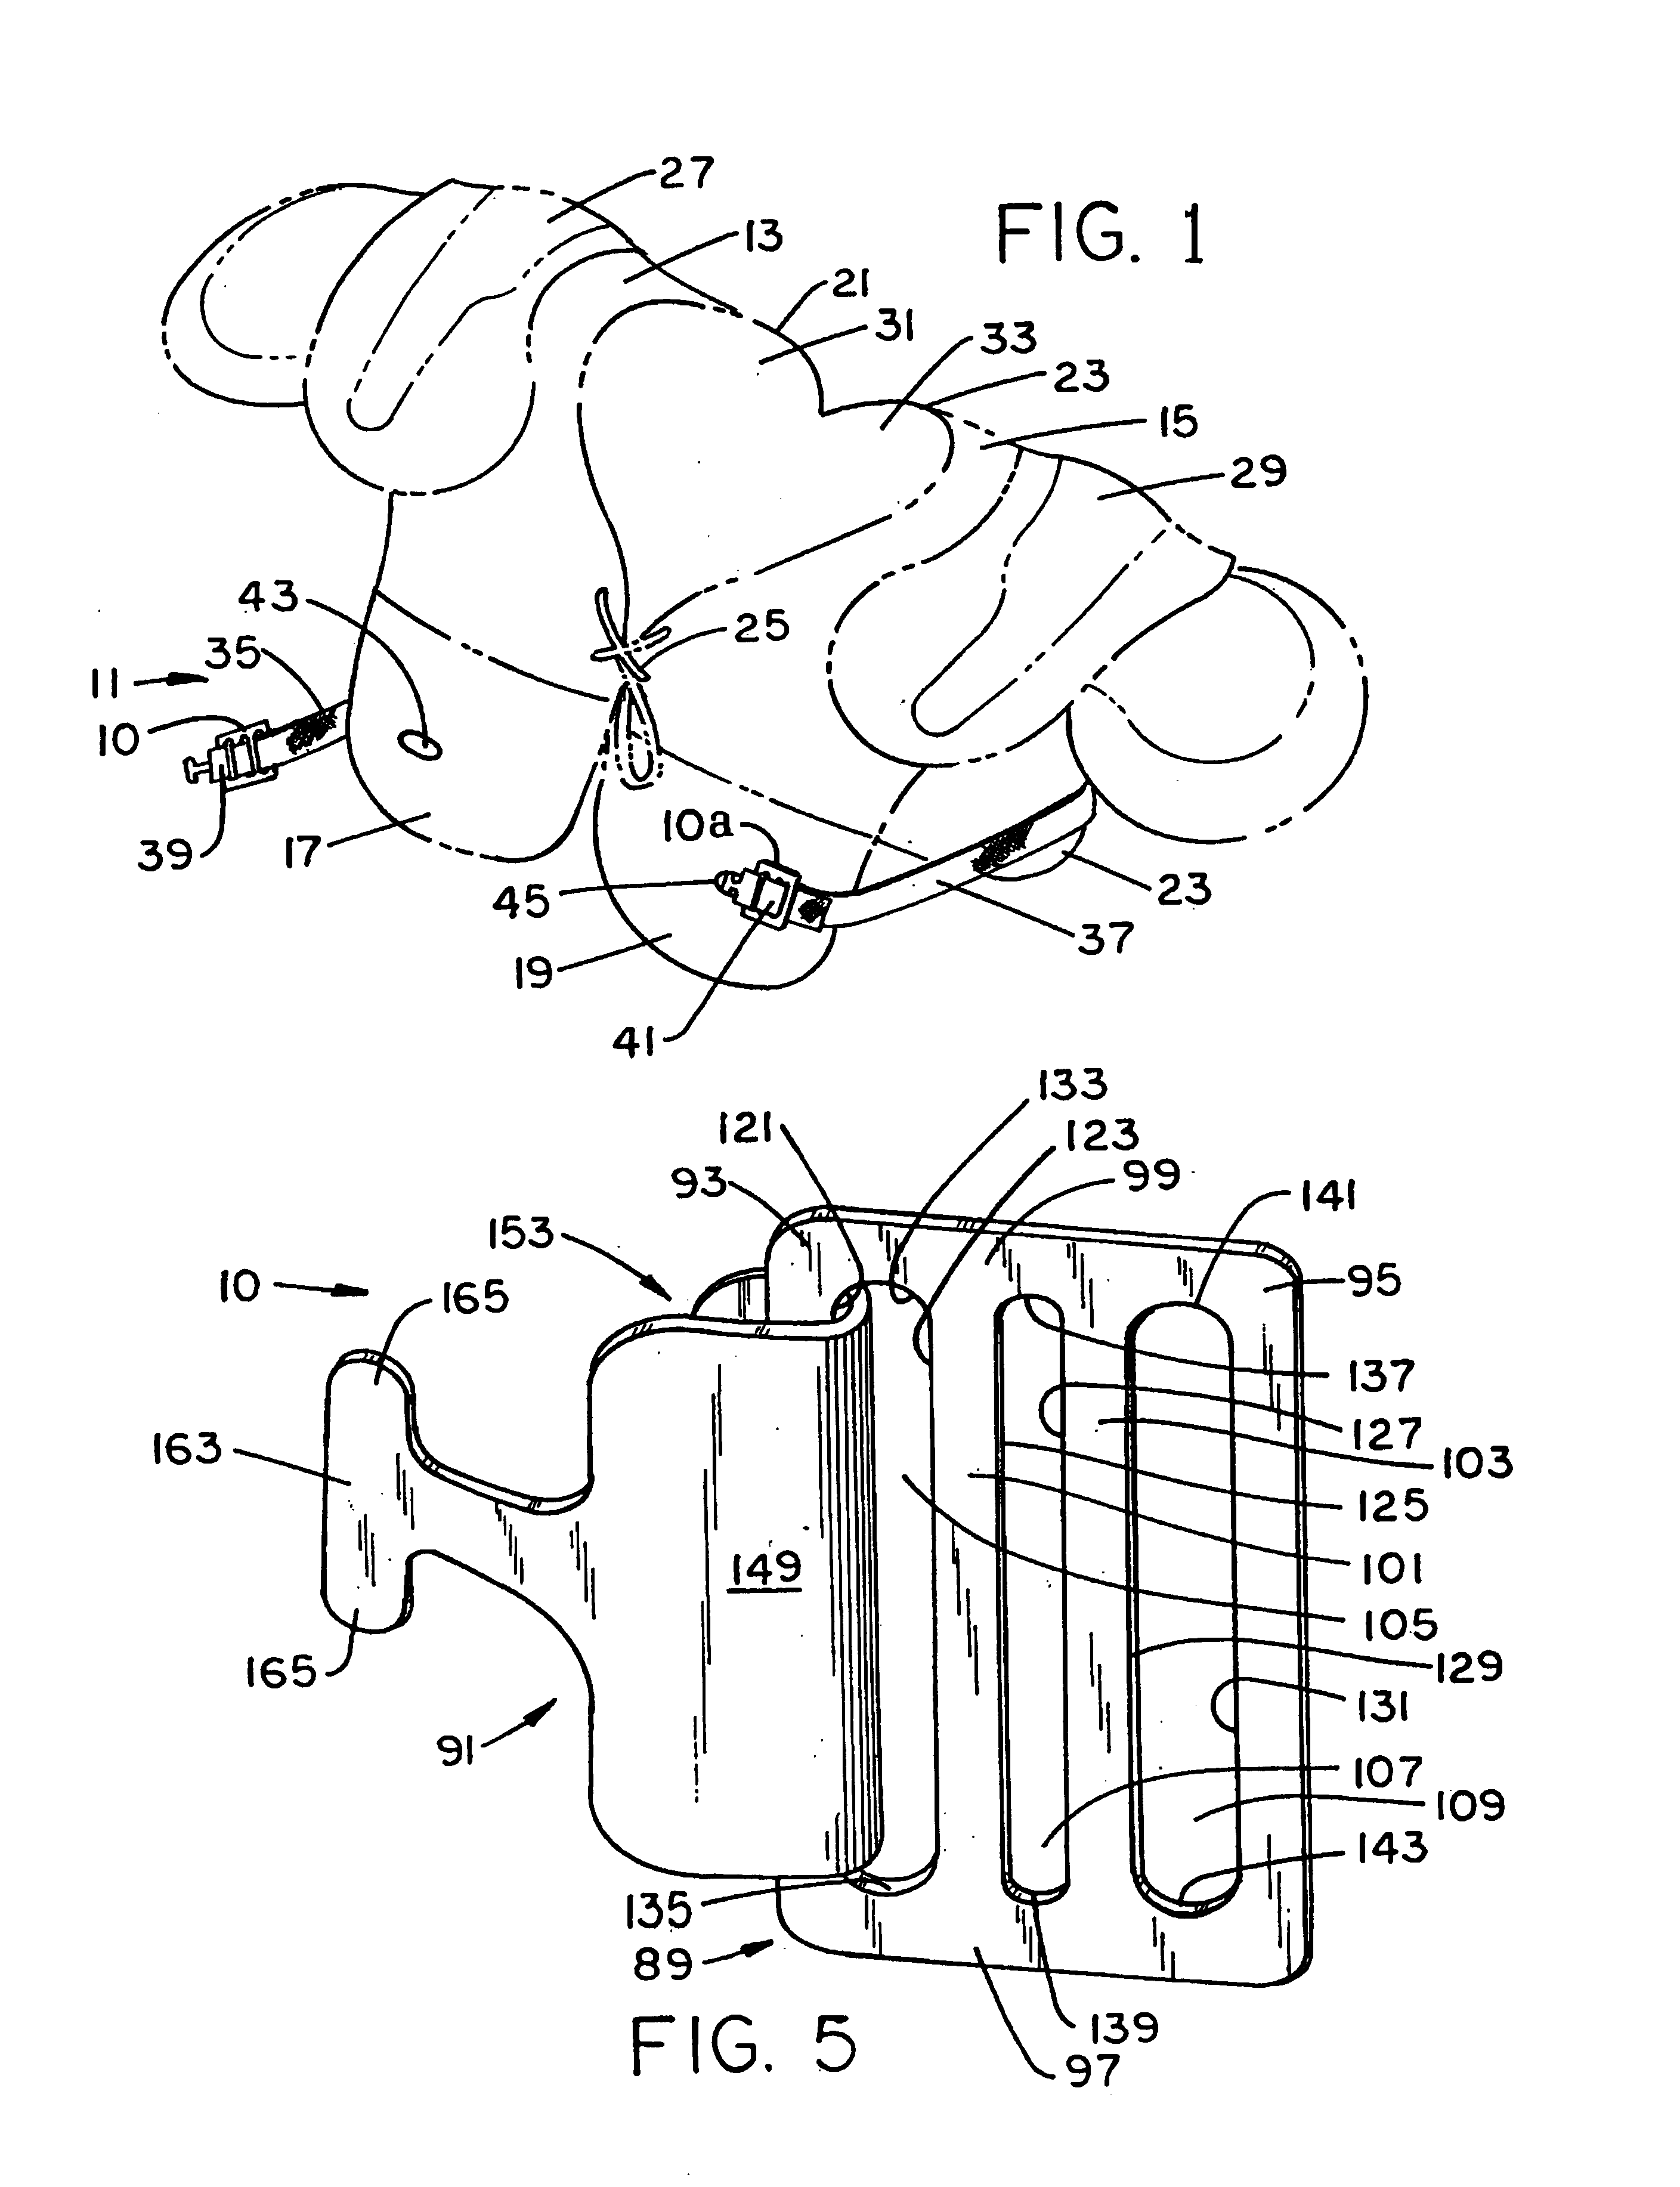 Strap-securing device